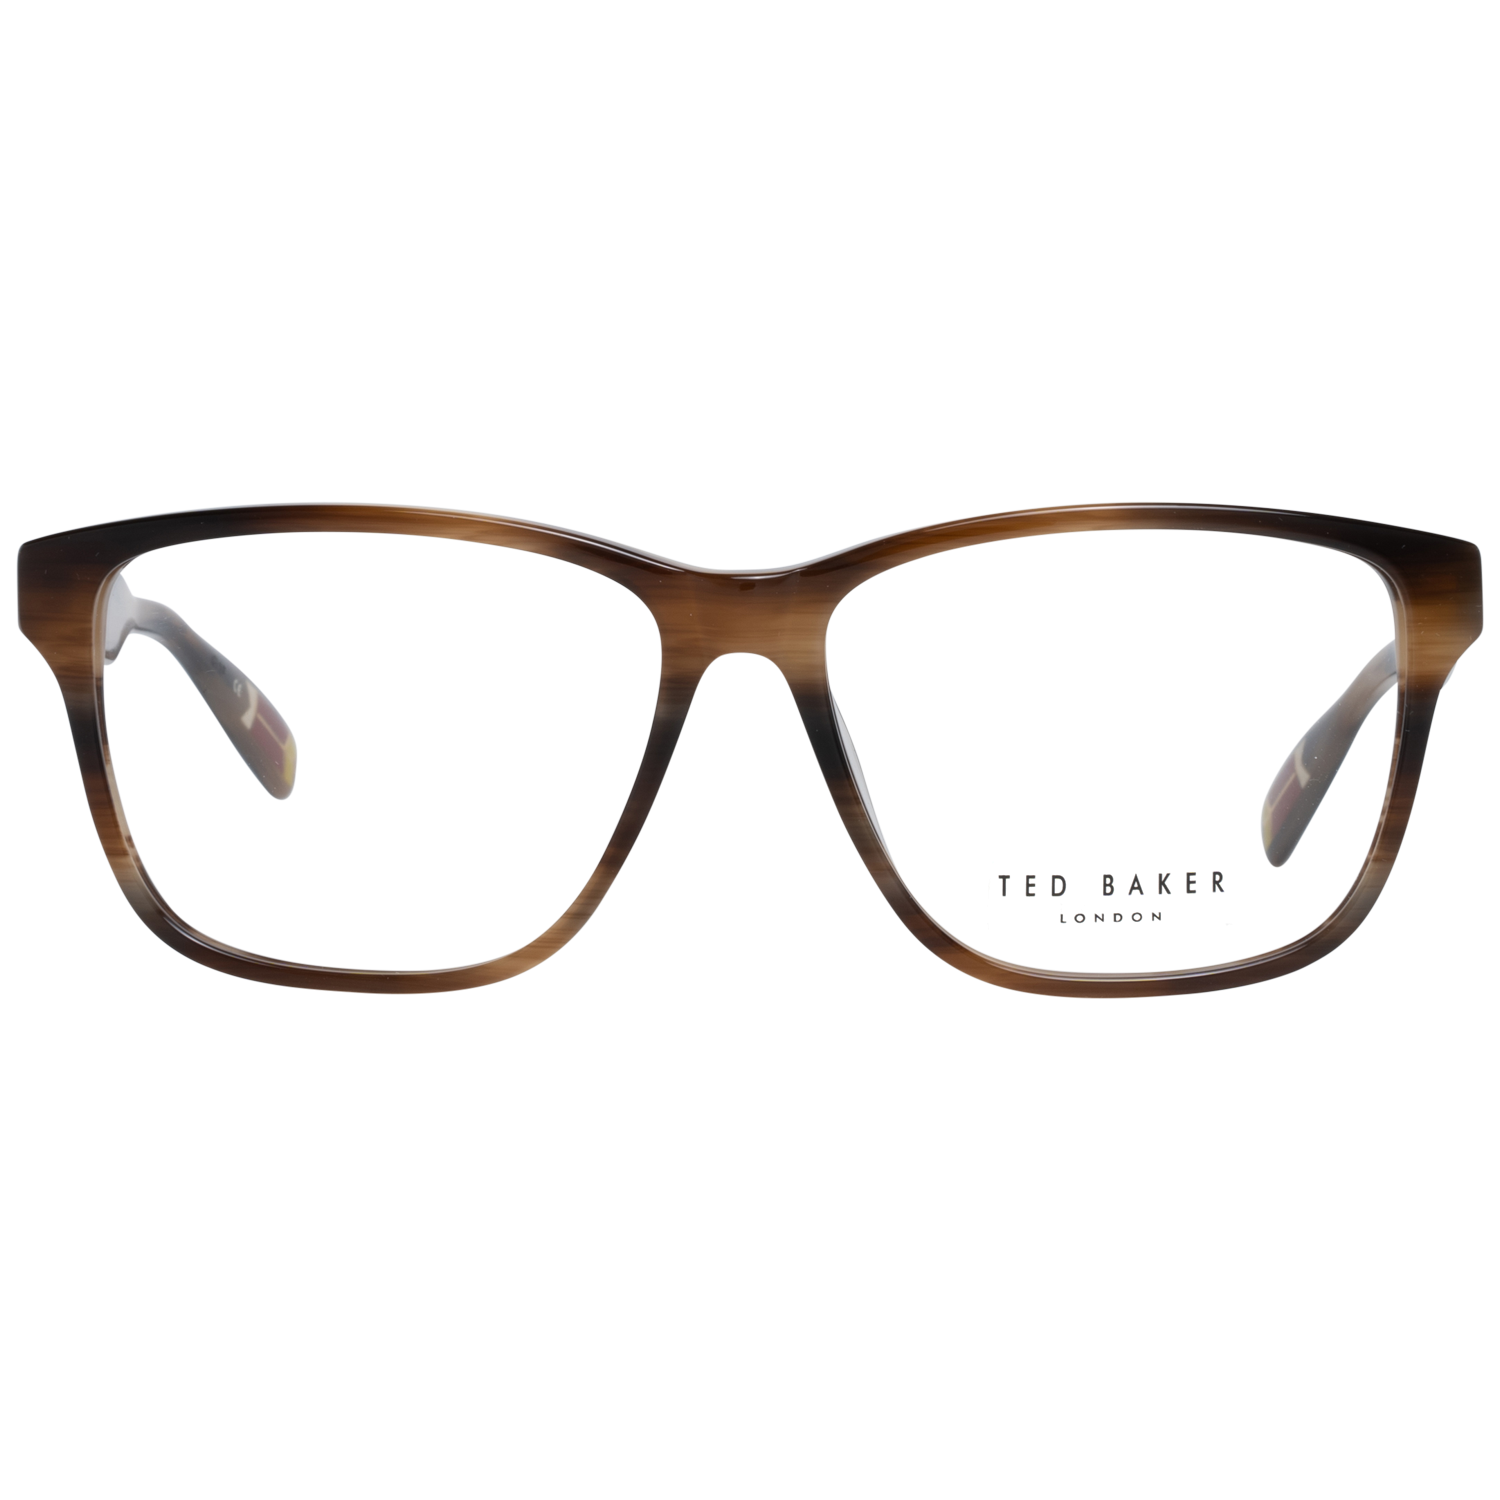 GenderMenMain colorBrownFrame colorBrownFrame materialPlasticSize56-14-145Lenses width56mmLenses heigth43mmBridge length14mmFrame width134mmTemple length145mmShipment includesCase, Cleaning clothStyleFull-RimSpring hingeYes